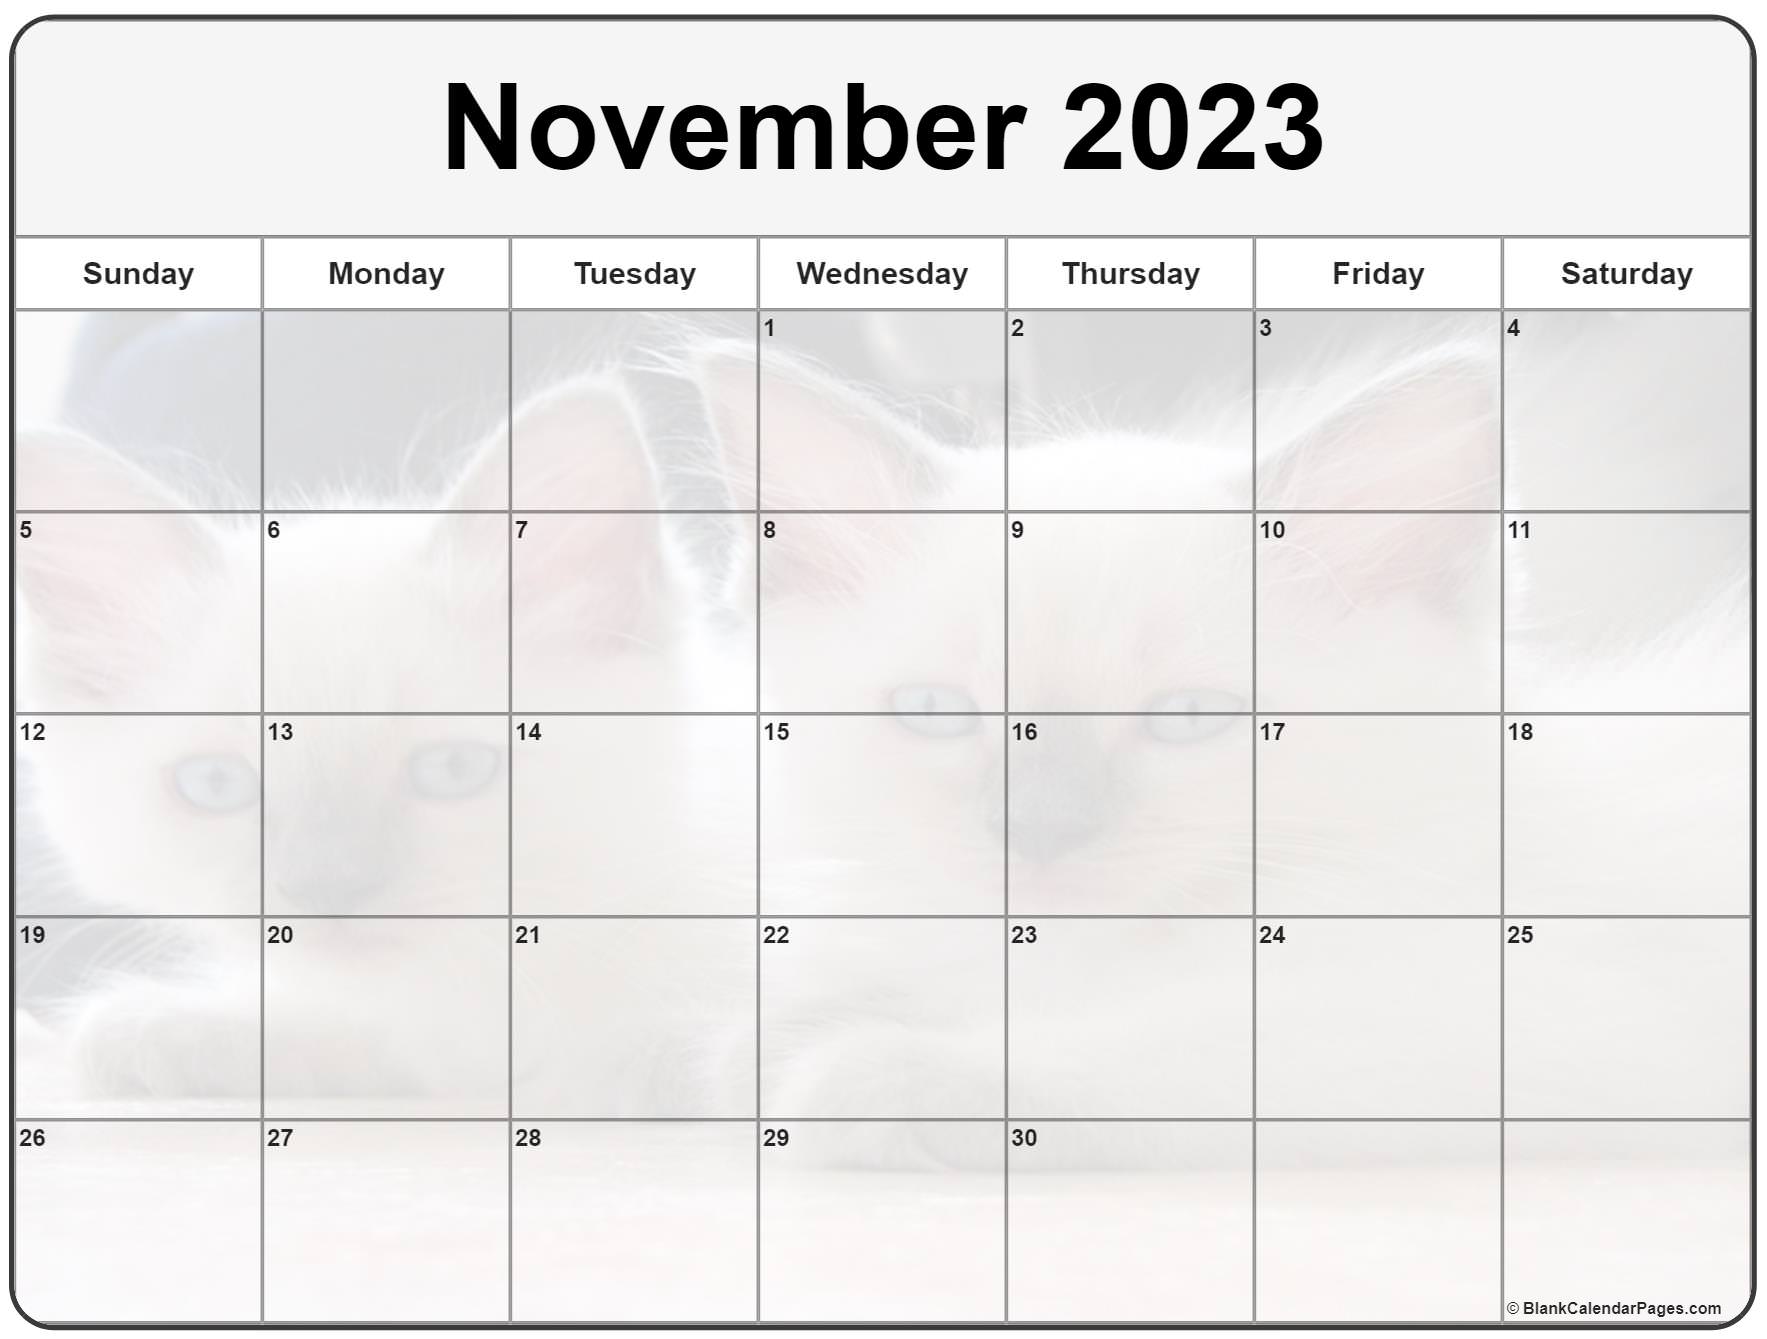 Collection of November 2023 photo calendars with image filters